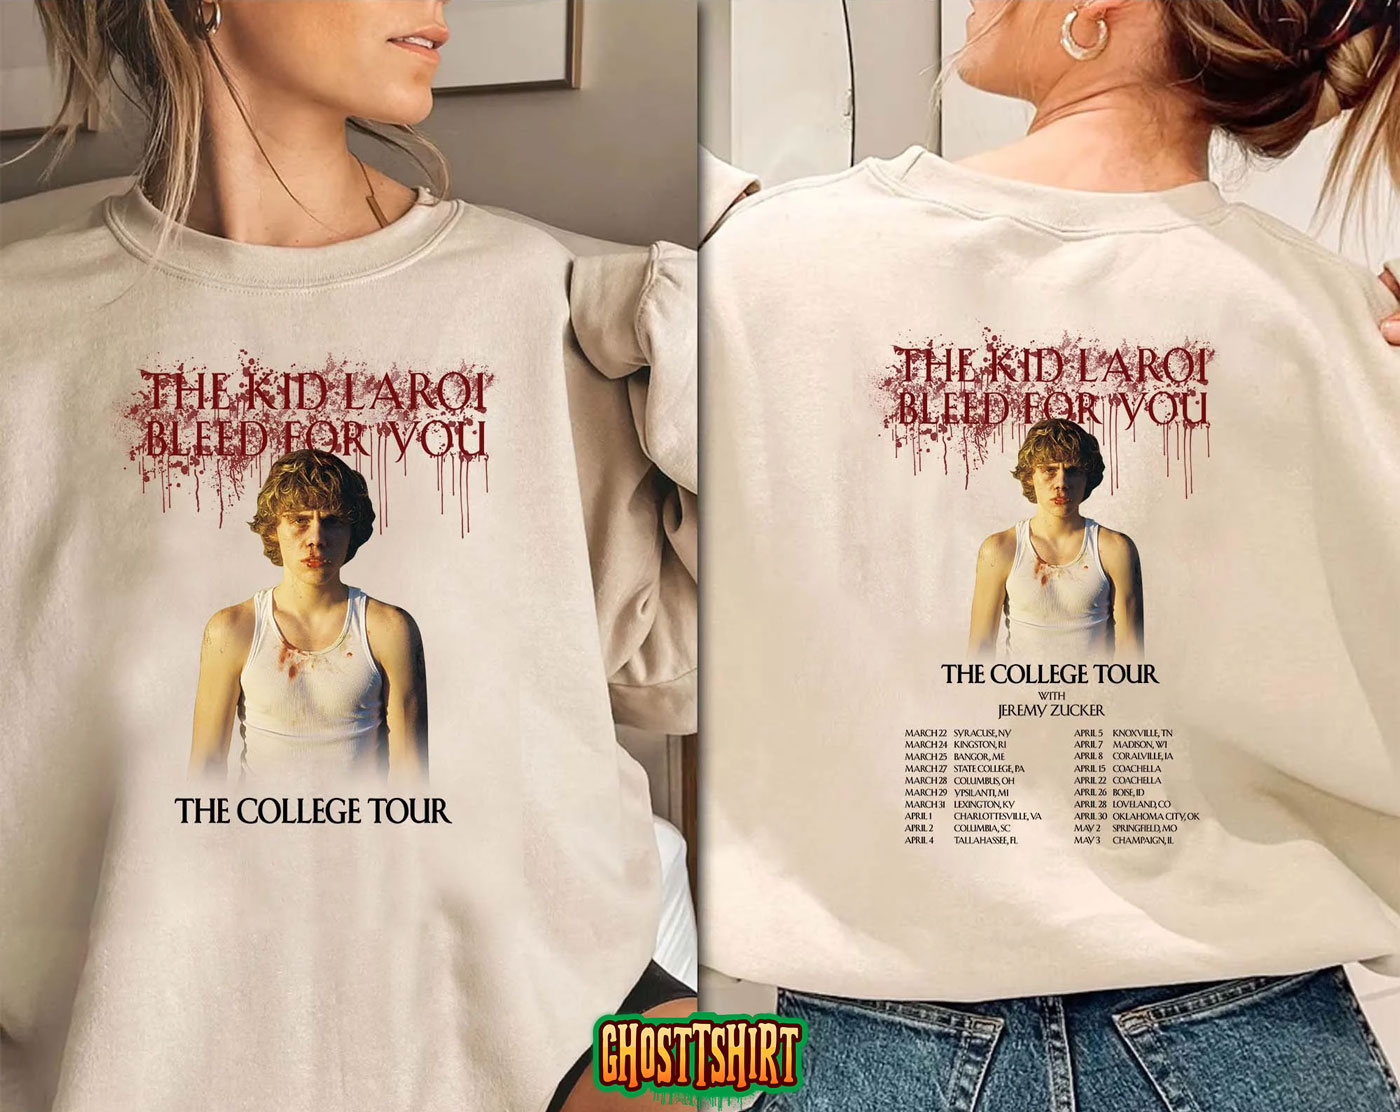 bleed for you tour merch